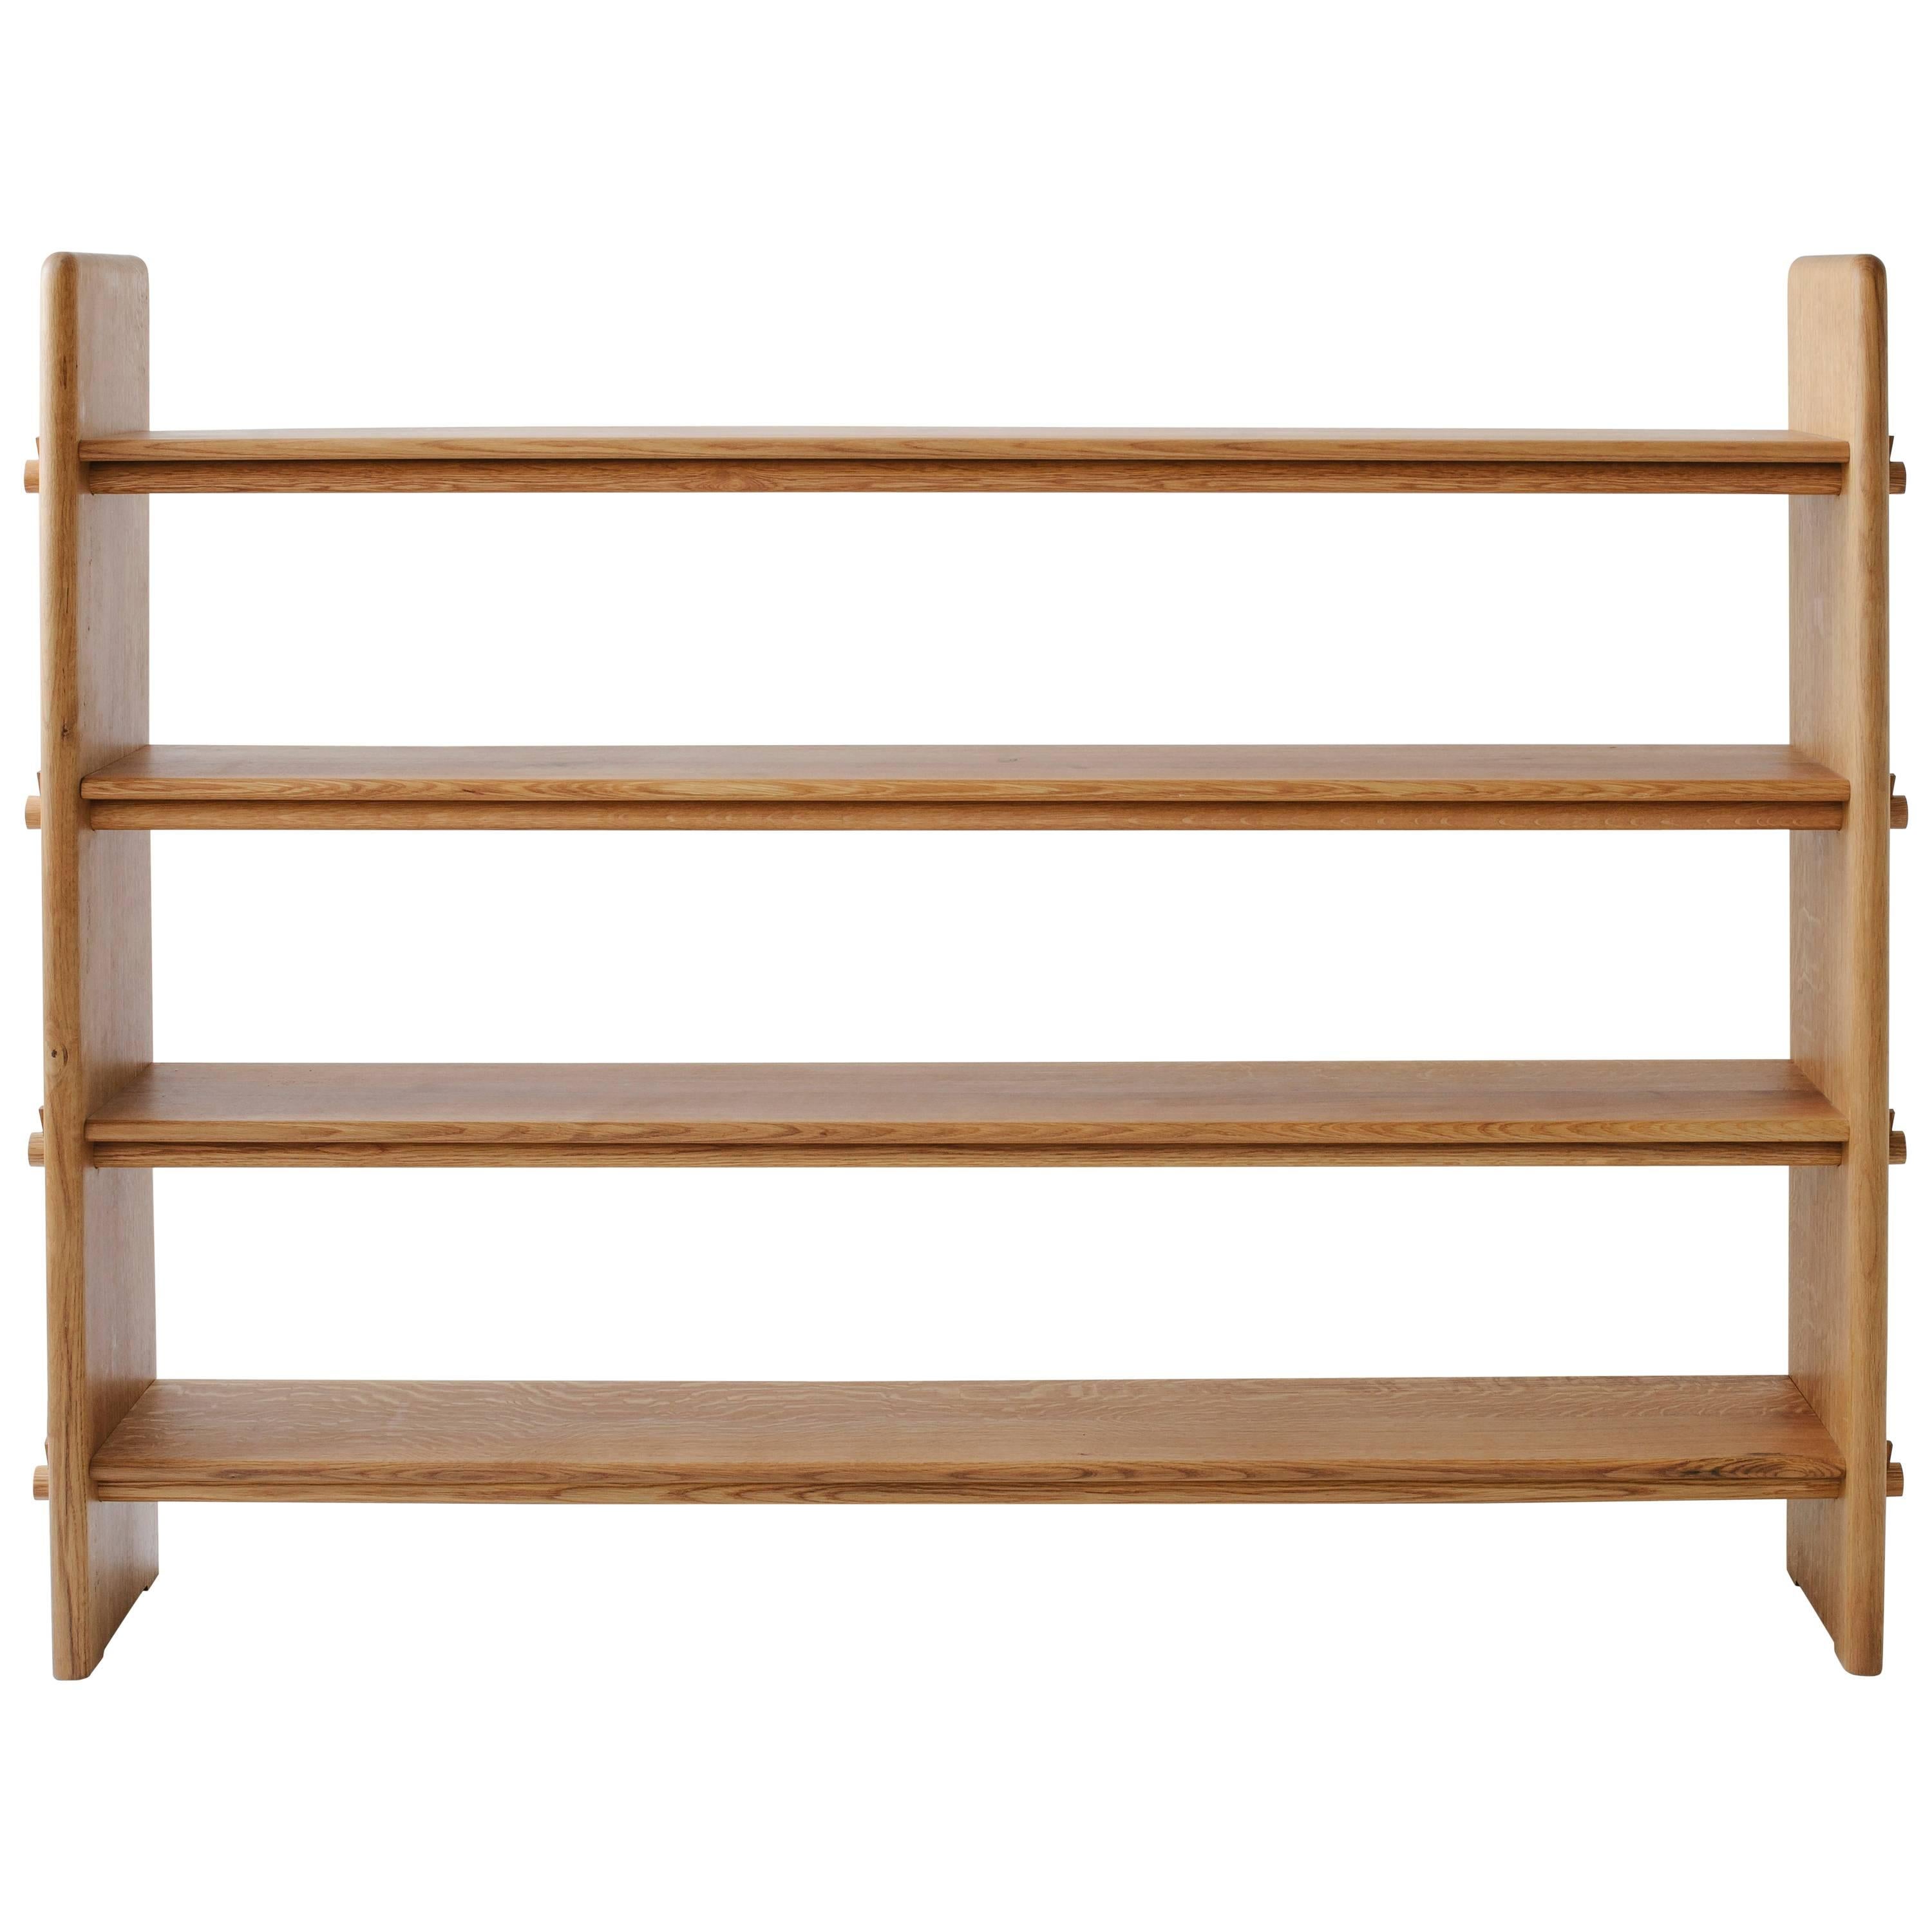 Contemporary Pin Shelf in White Oak Wood by Fort Standard, in Stock